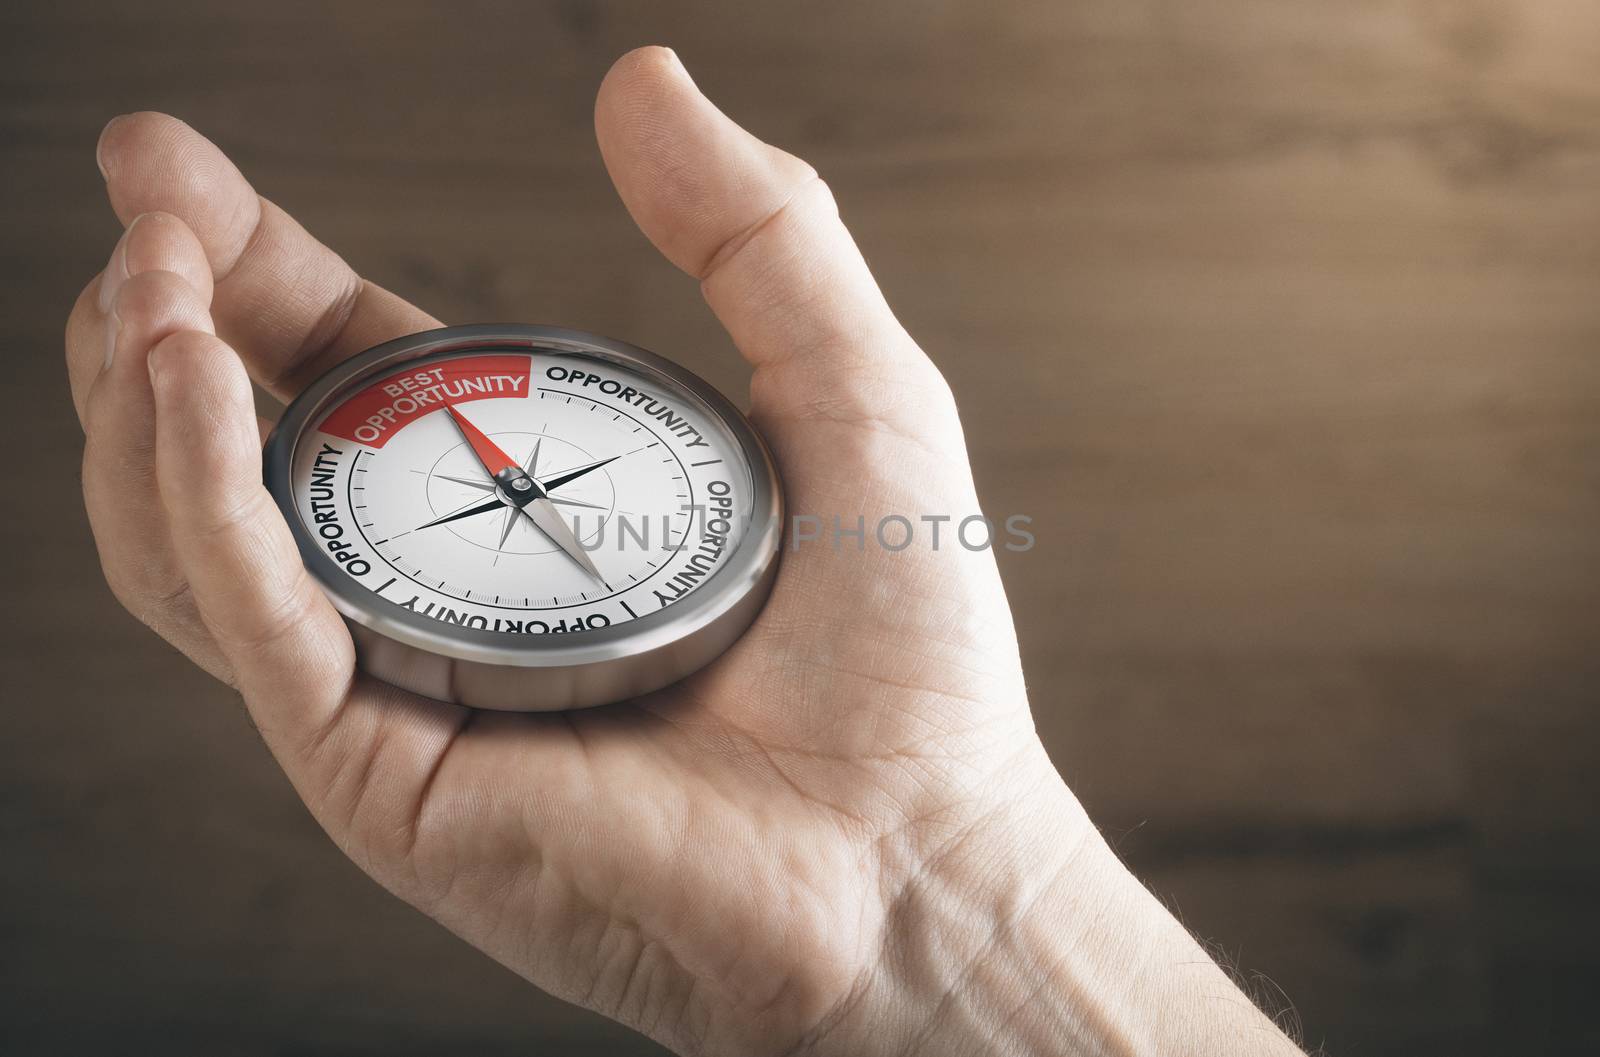 Man hand showing compass with needle pointing the text best opportunity. Concept image to illustrate business or career opportunities.